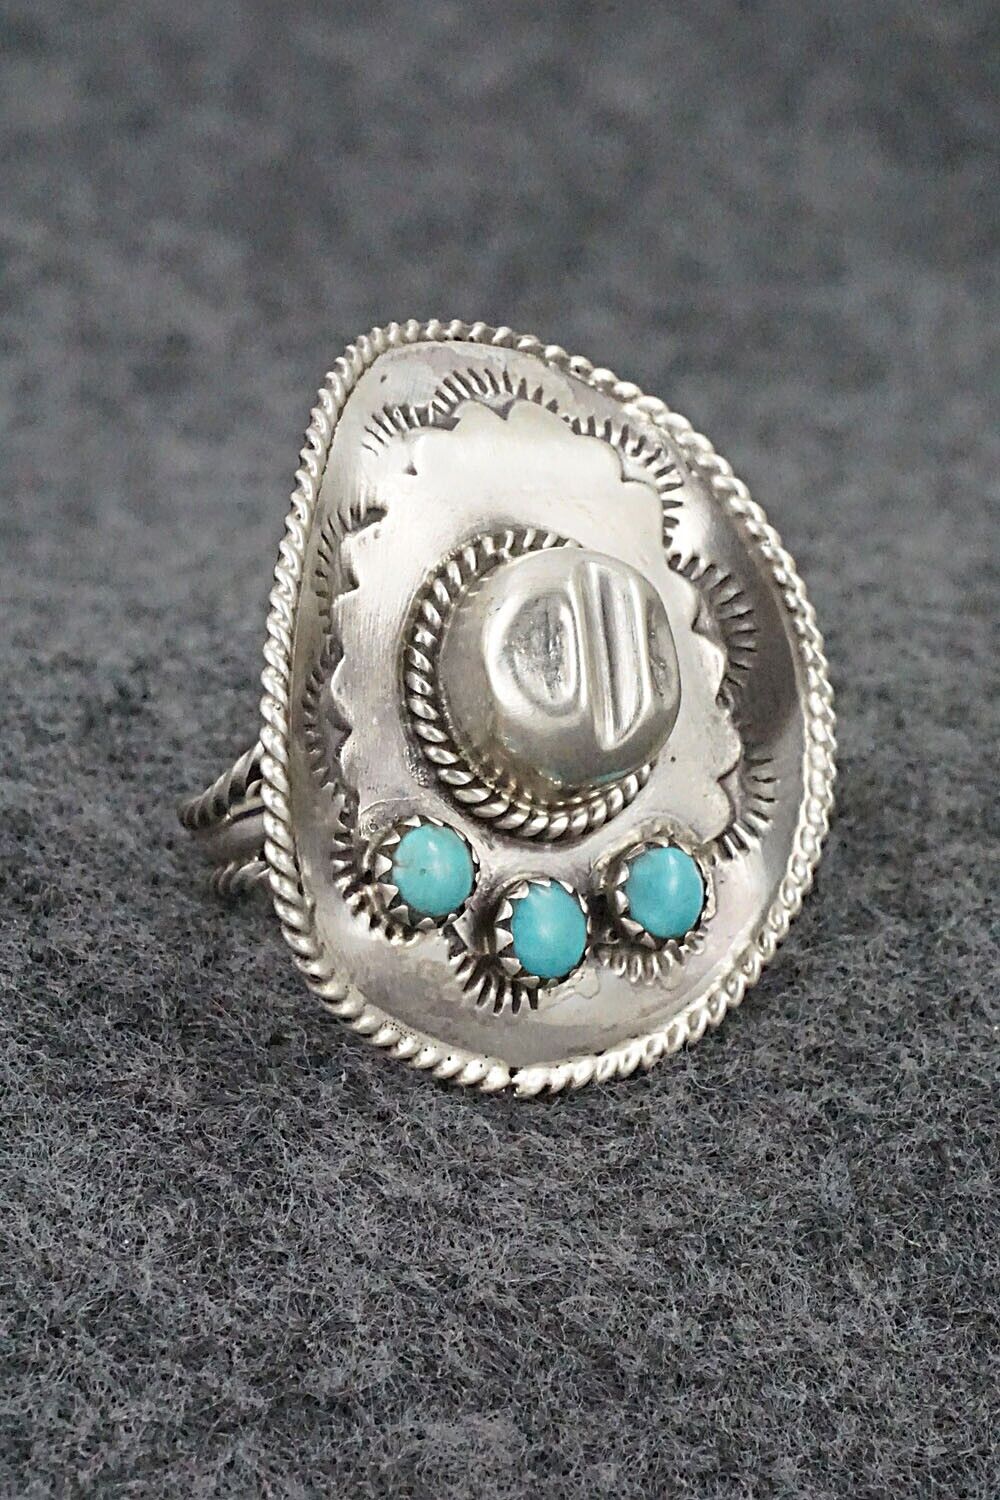 Turquoise & Sterling Silver Ring - Bobby Platero - Size 6